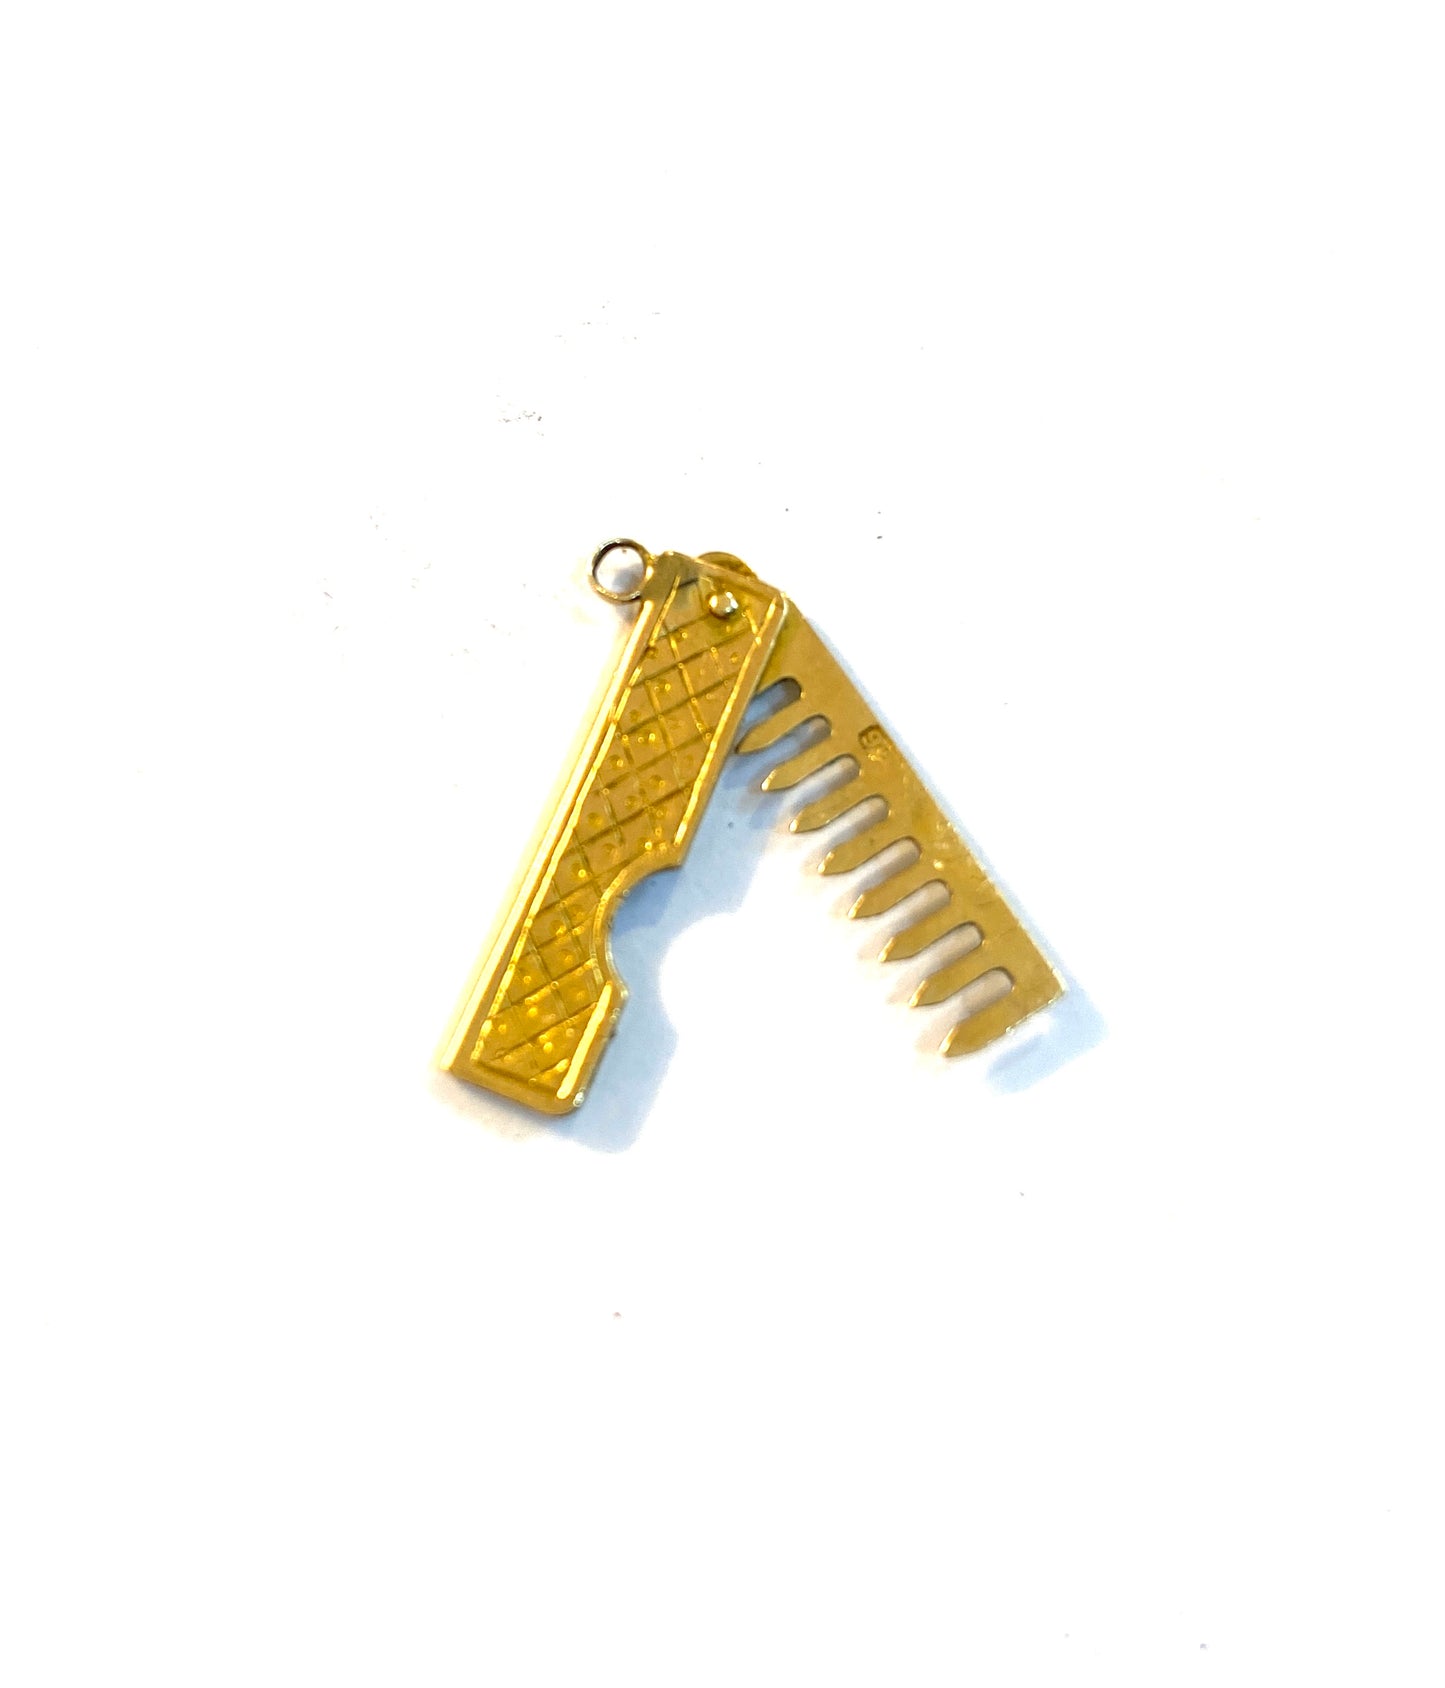 9ct vintage opening comb charm